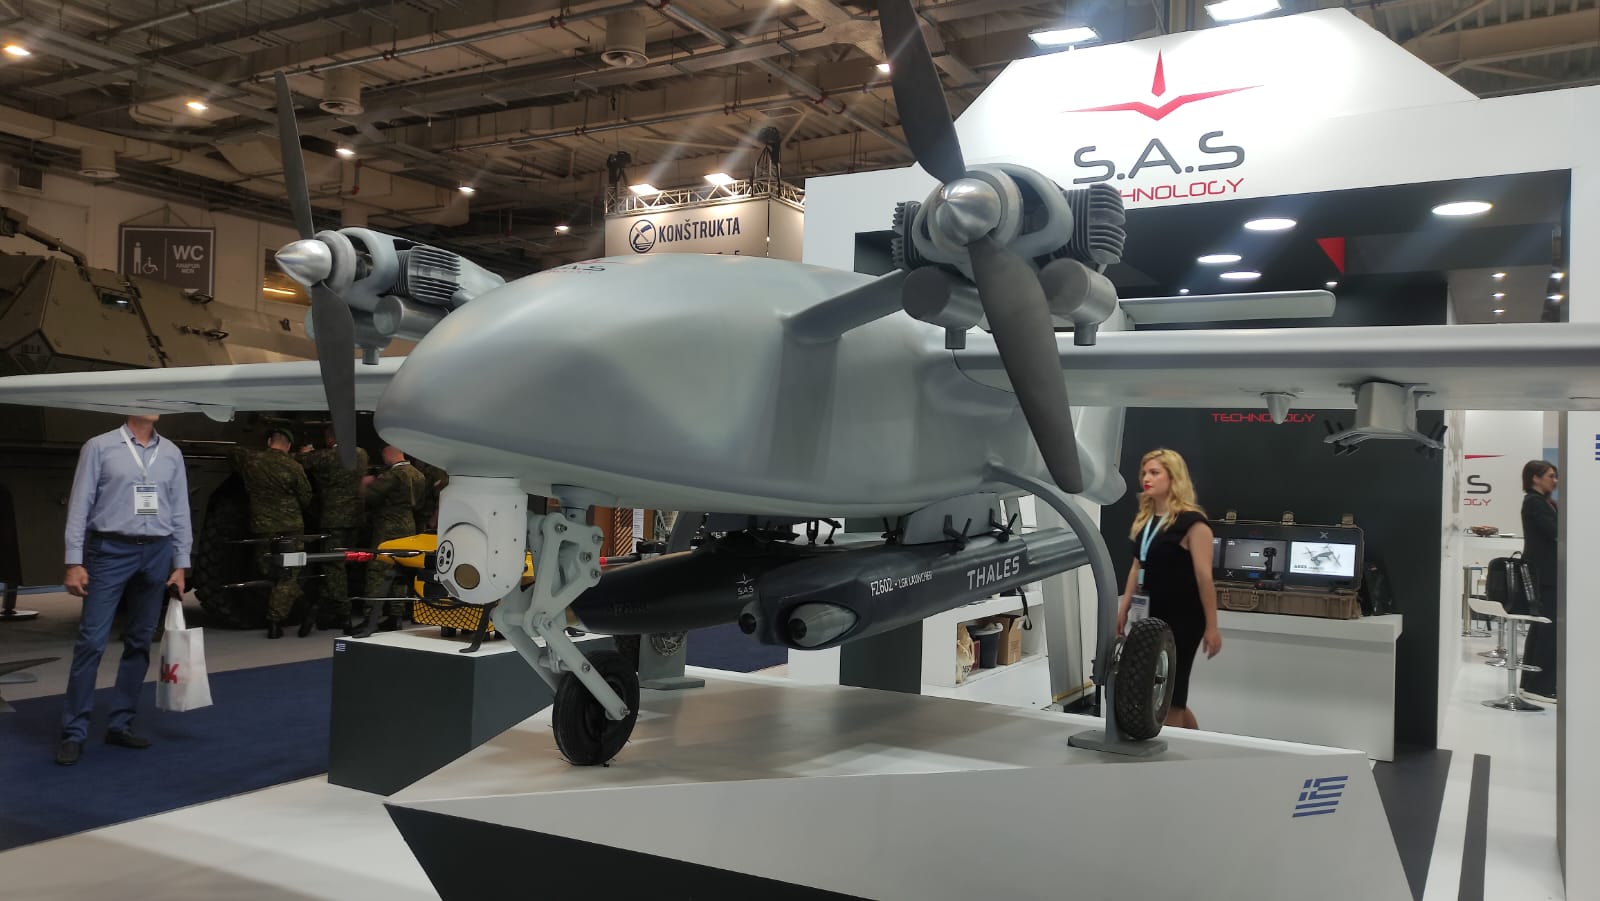 Talos II, a reconnaissance drone with a speed of up to 200 km/h, a range of 500 km and a flight time of more than 20 hours, is unveiled